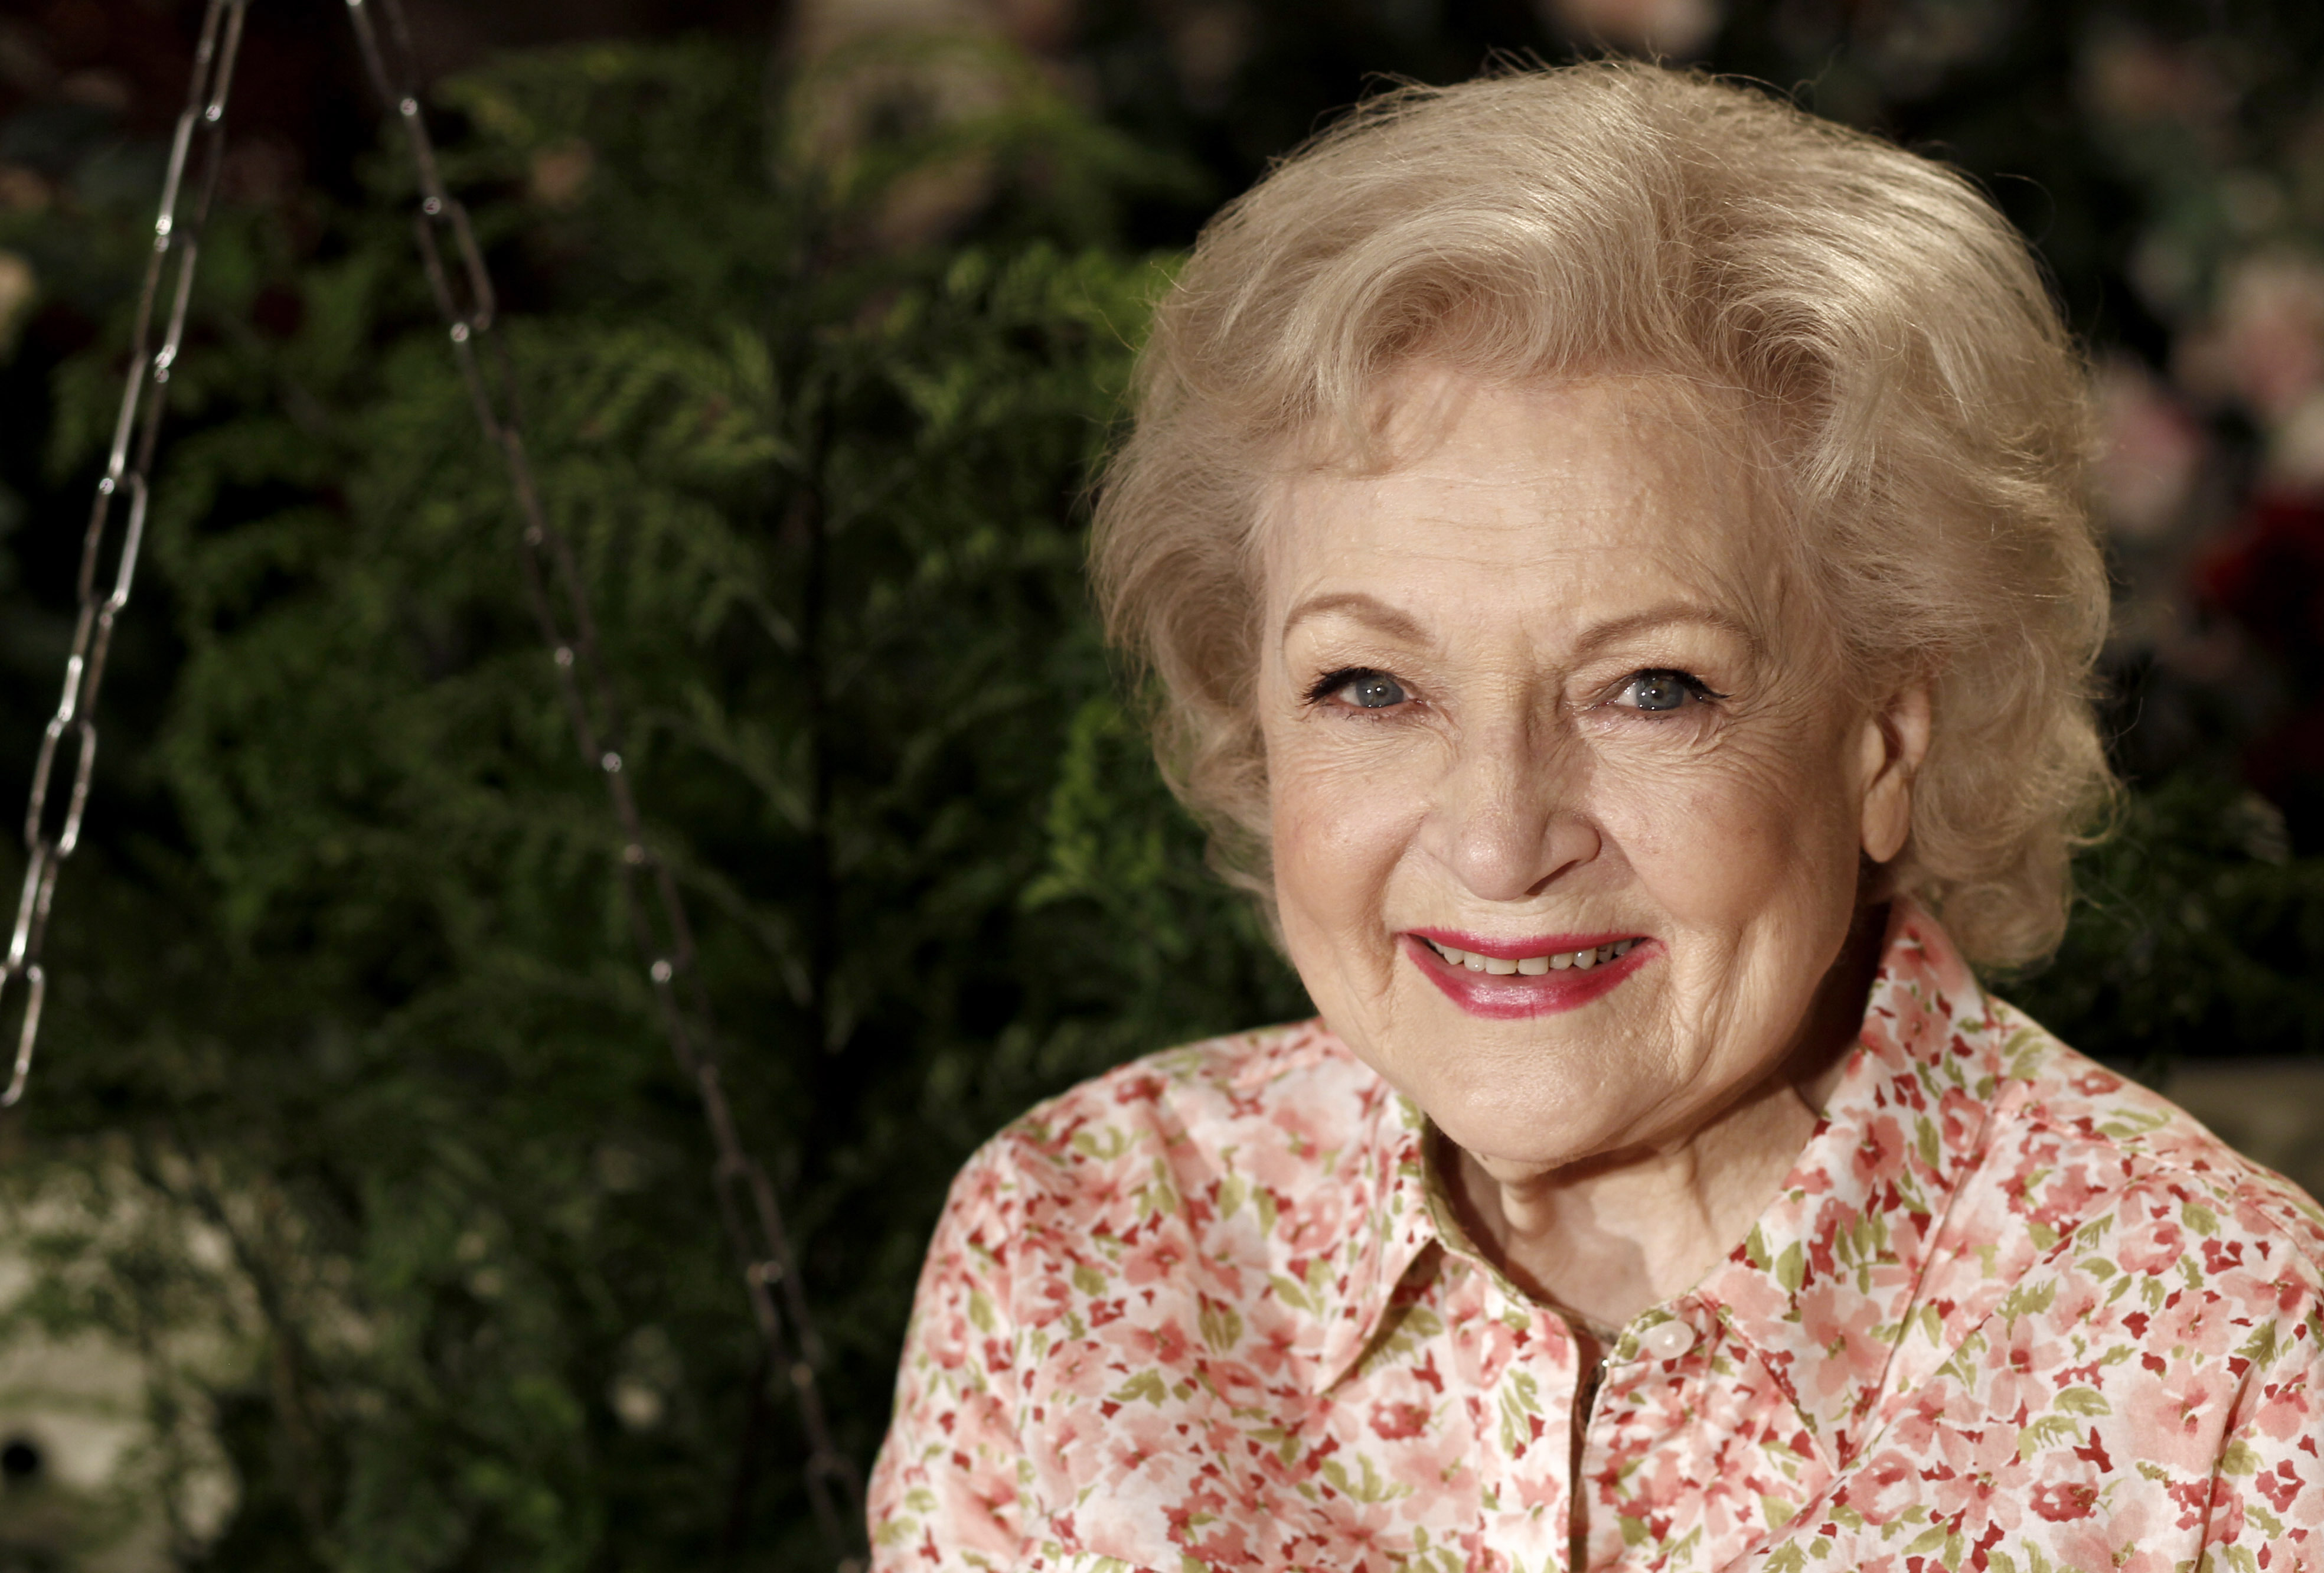 Golden Girls' Actress Betty White Dead at 99 Years Old